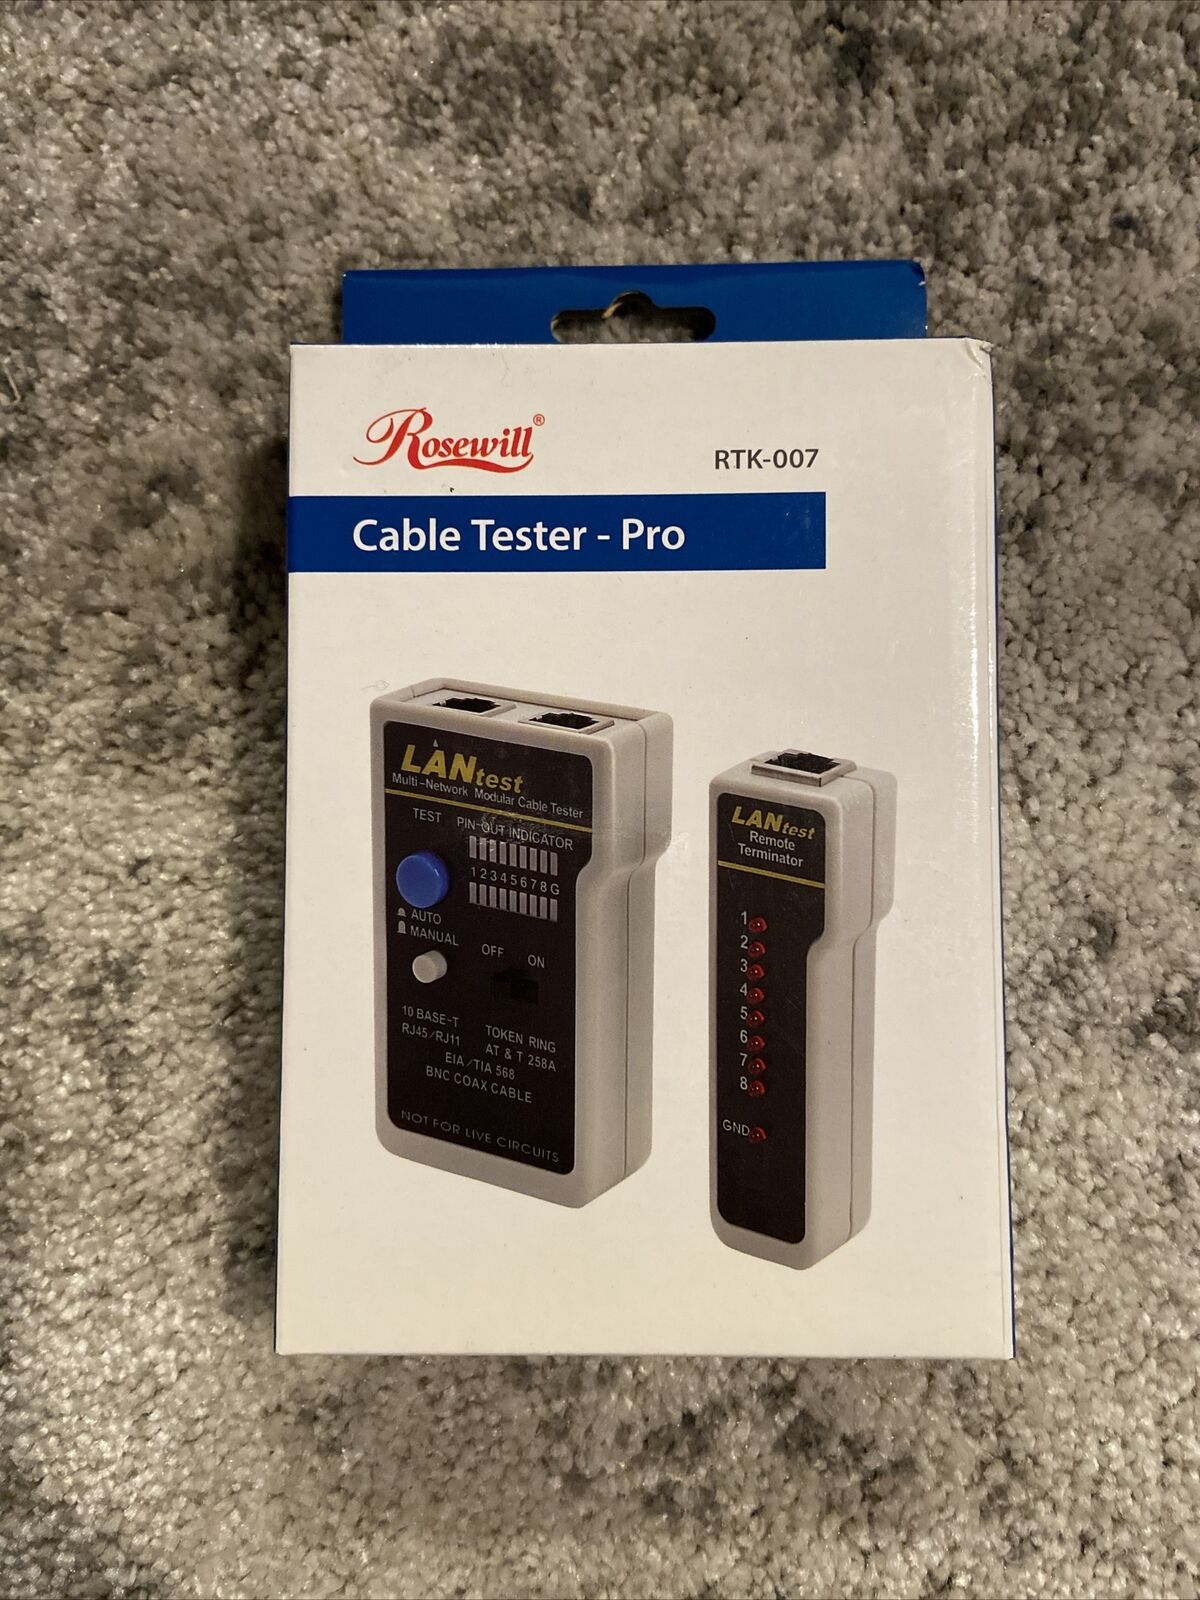 New Rosewill Cable Tester - Pro Model RTK-007